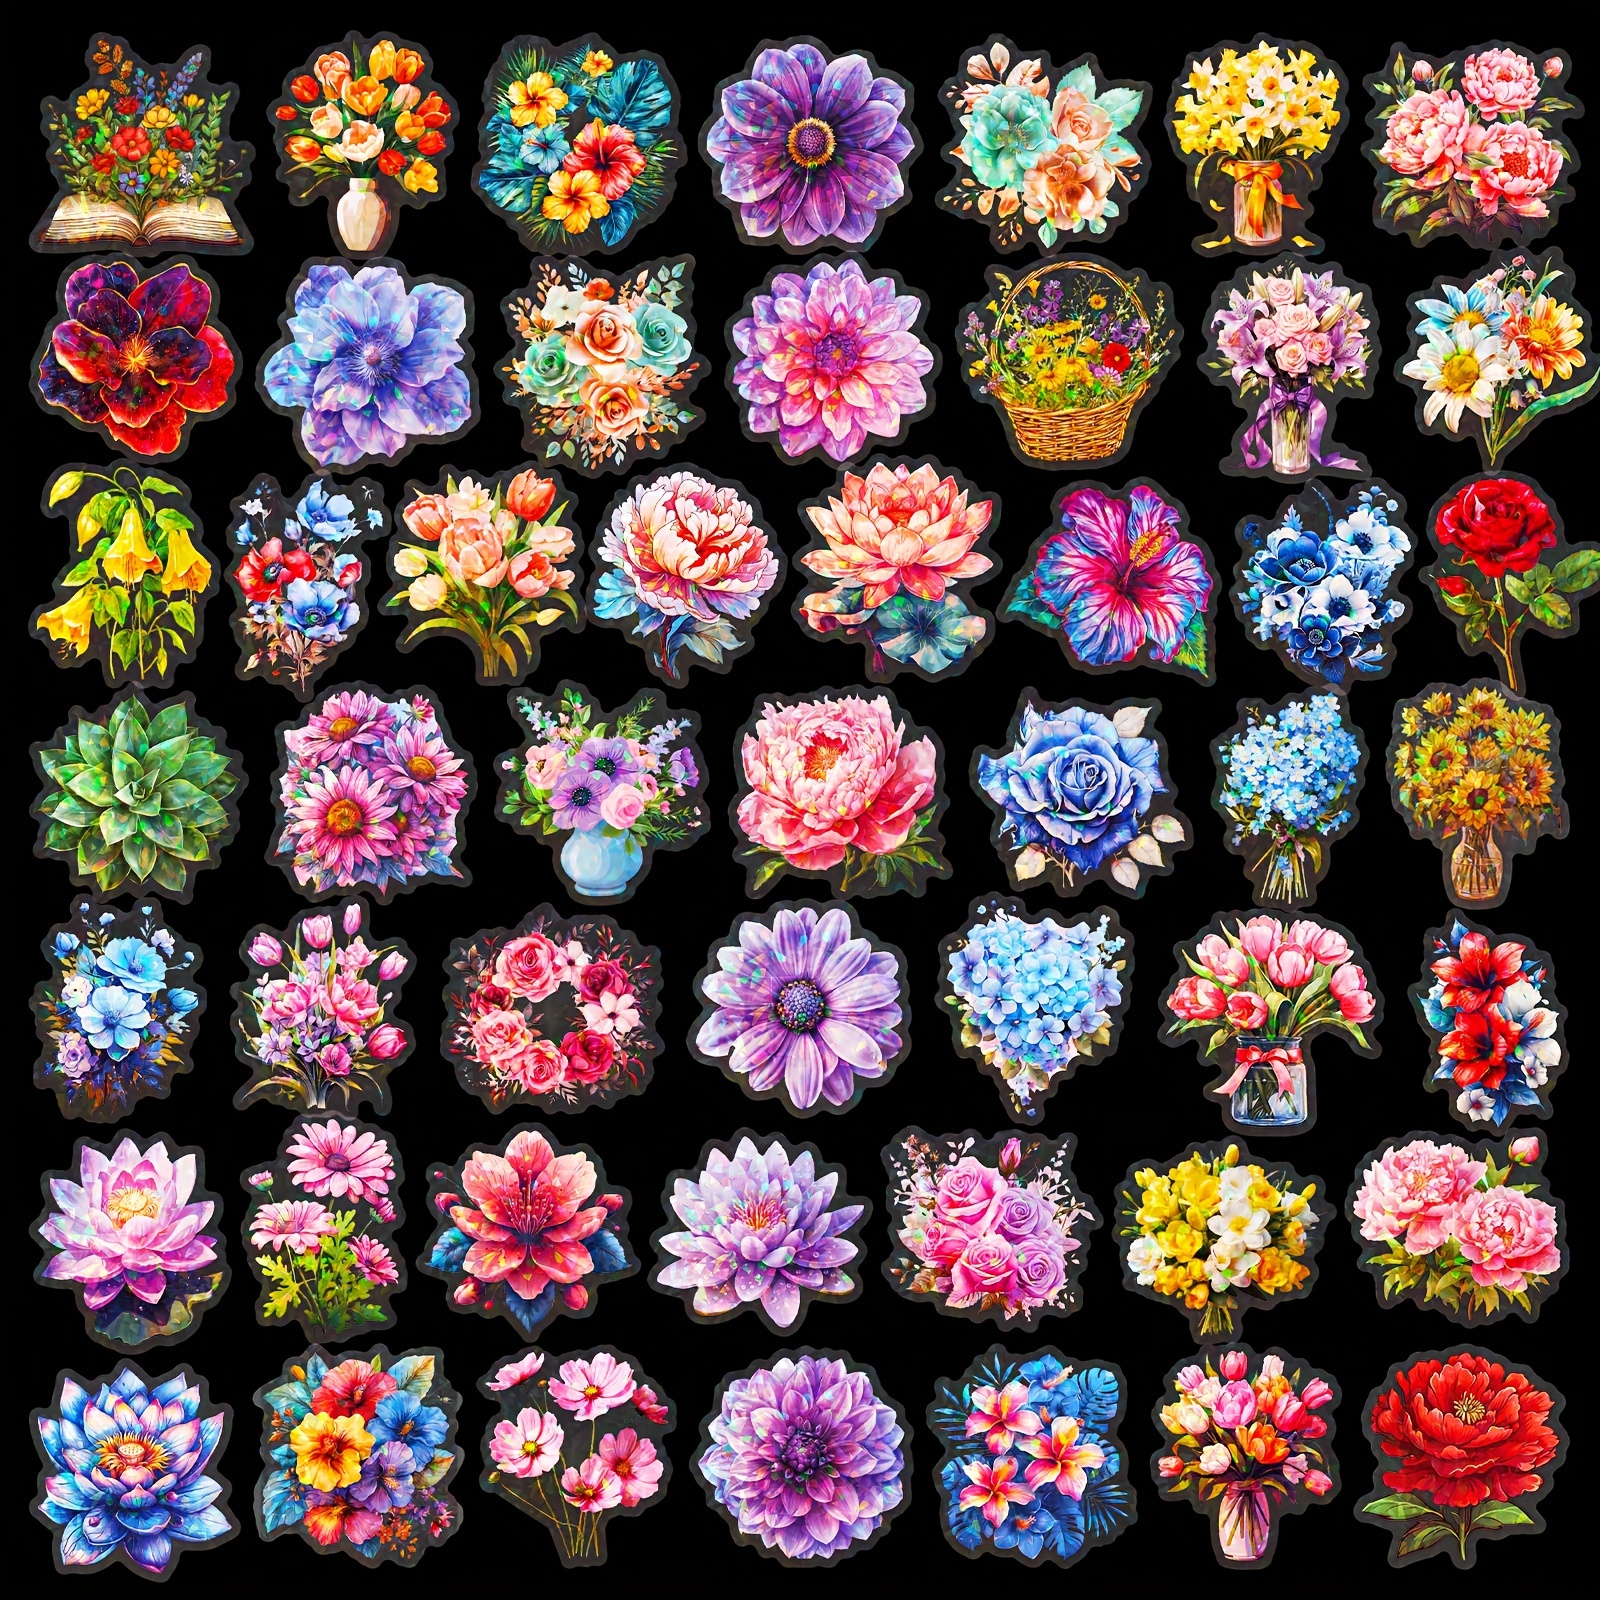 

50sheets Decorative Stickers, Laser Flower Pet Transparent Sticker Hand Account Waterproof Stickers For Scrapbook Label Diary Stationery Album Telephone Journal Planner